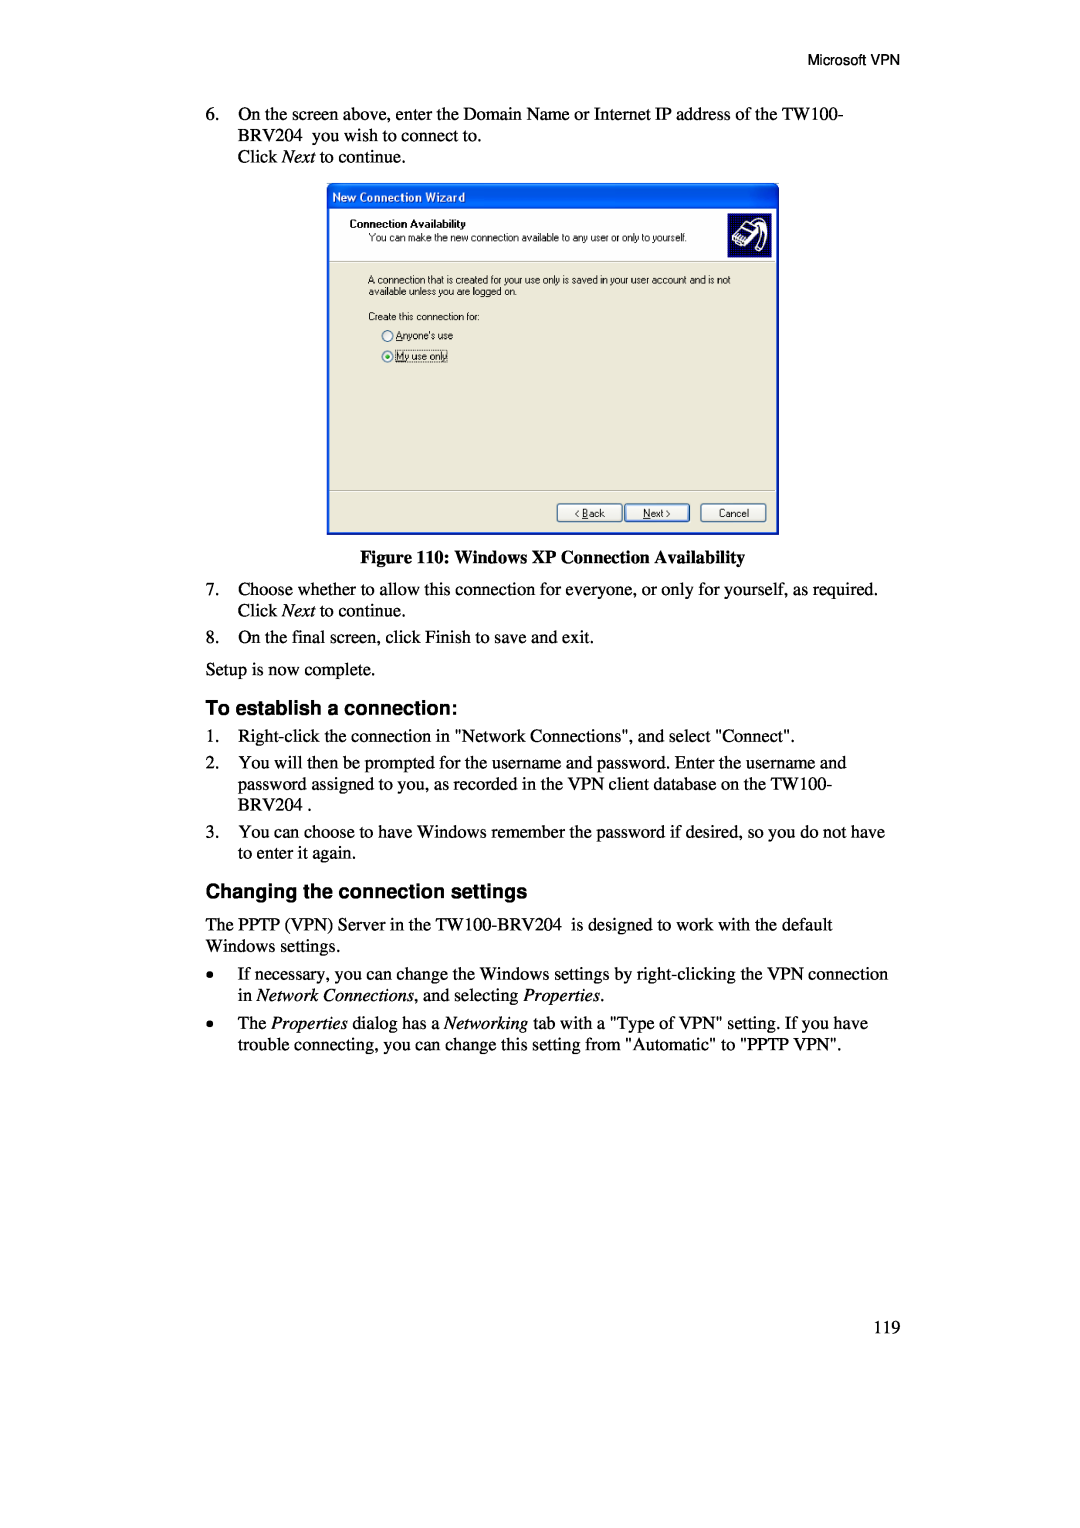 TRENDnet BRV204 manual To establish a connection, Changing the connection settings, Windows XP Connection Availability 